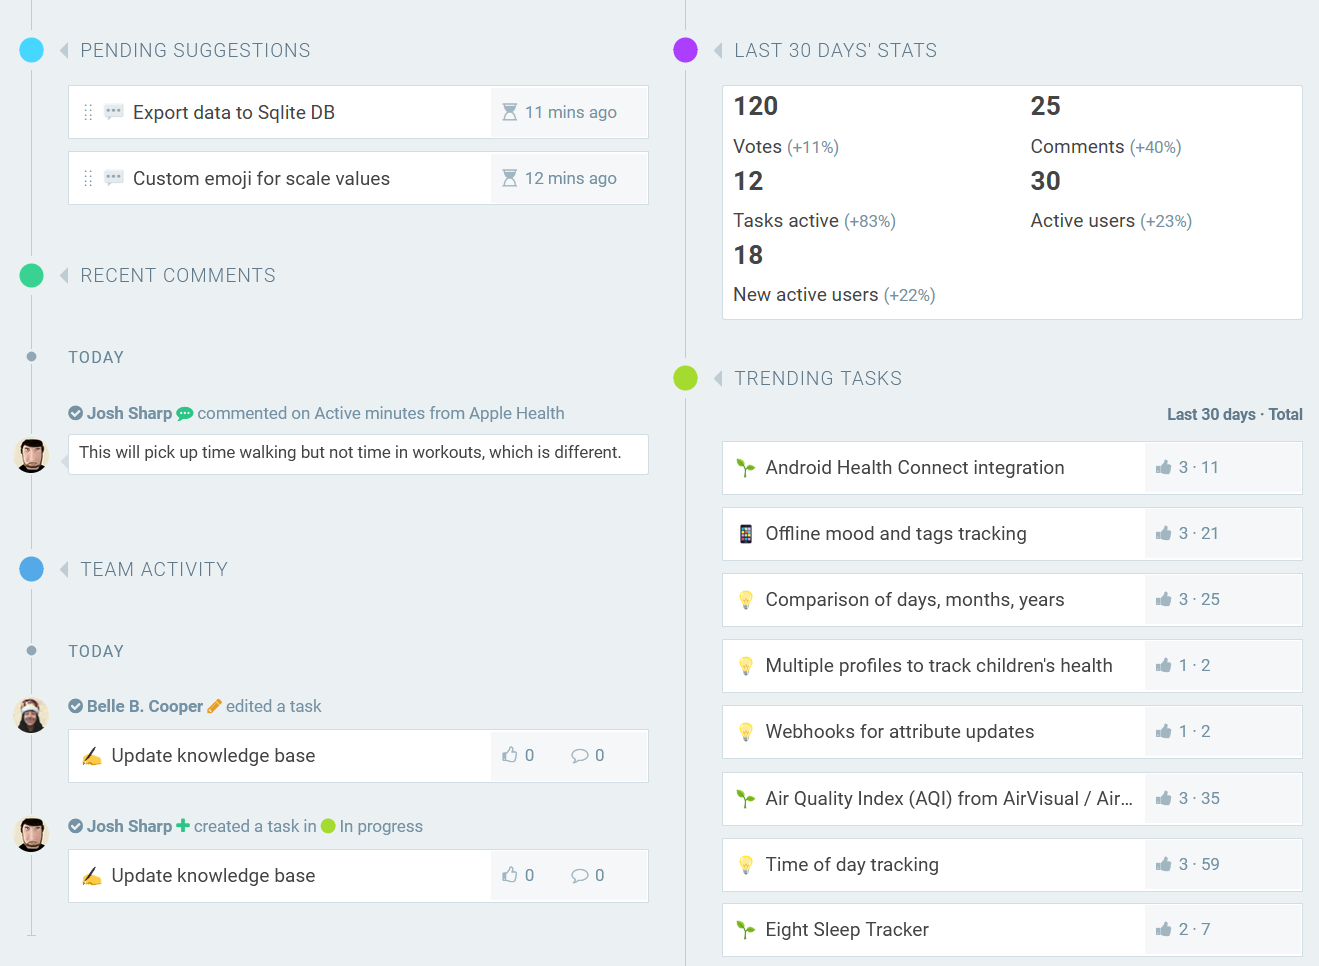 Dashboard showing pending tasks, activity, and stats